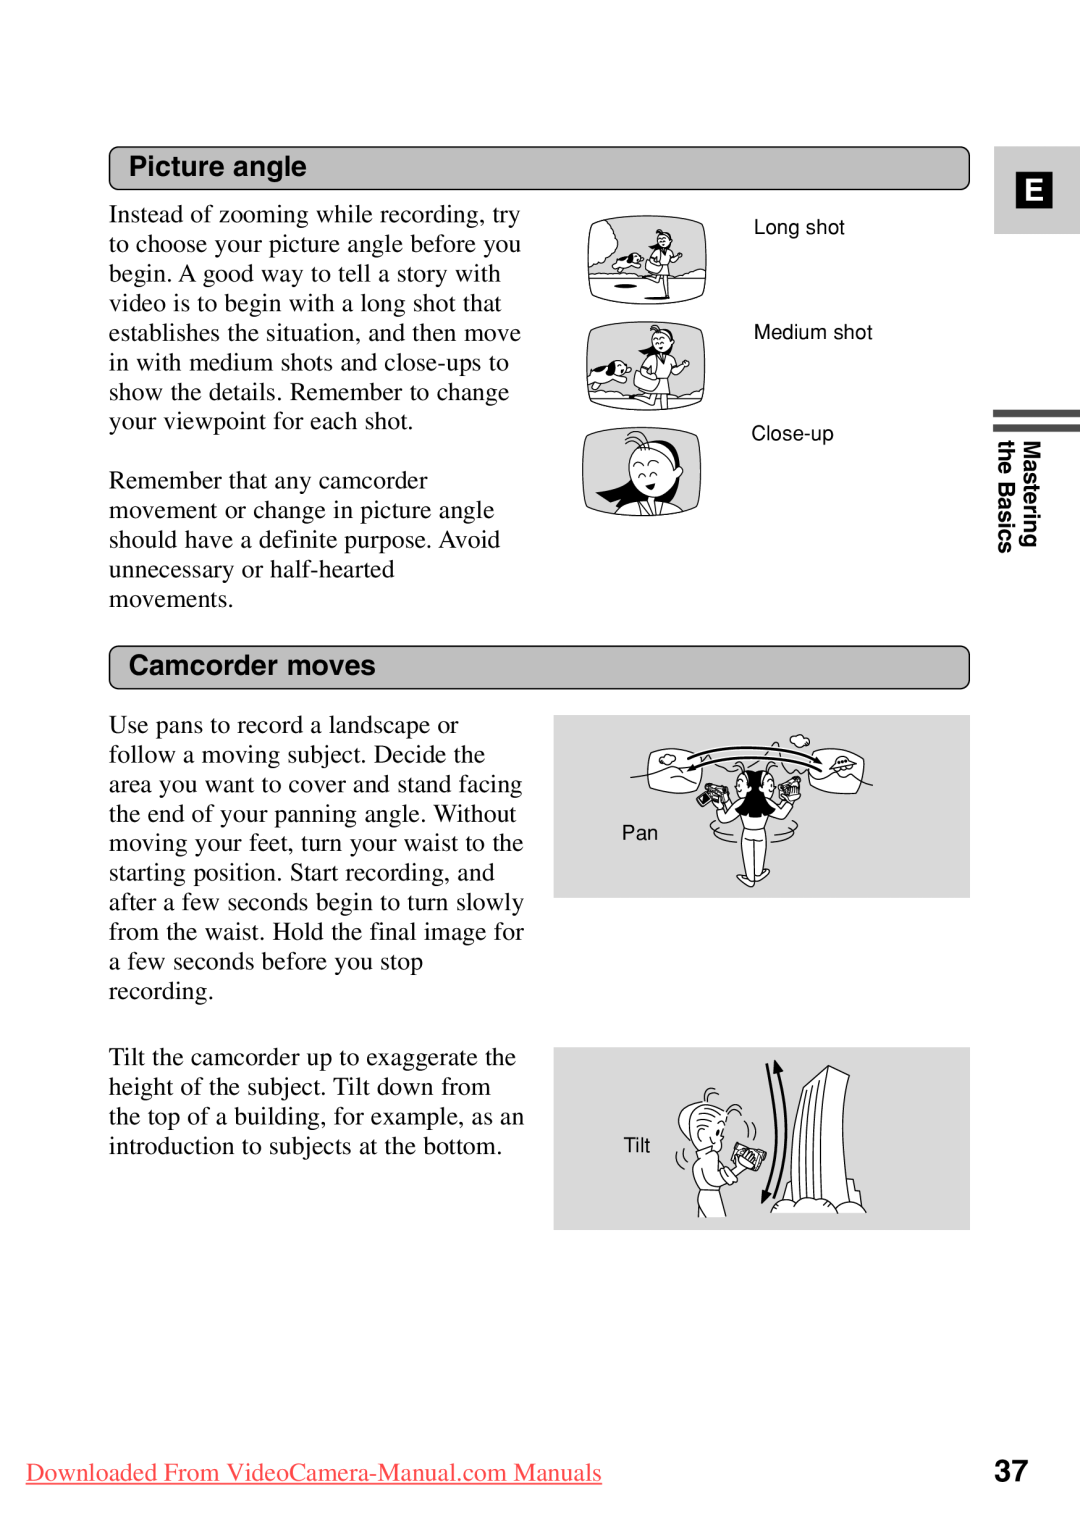 Canon MV500i, 7561A001 instruction manual Picture angle, Camcorder moves, Downloaded From VideoCamera-Manual.com Manuals 